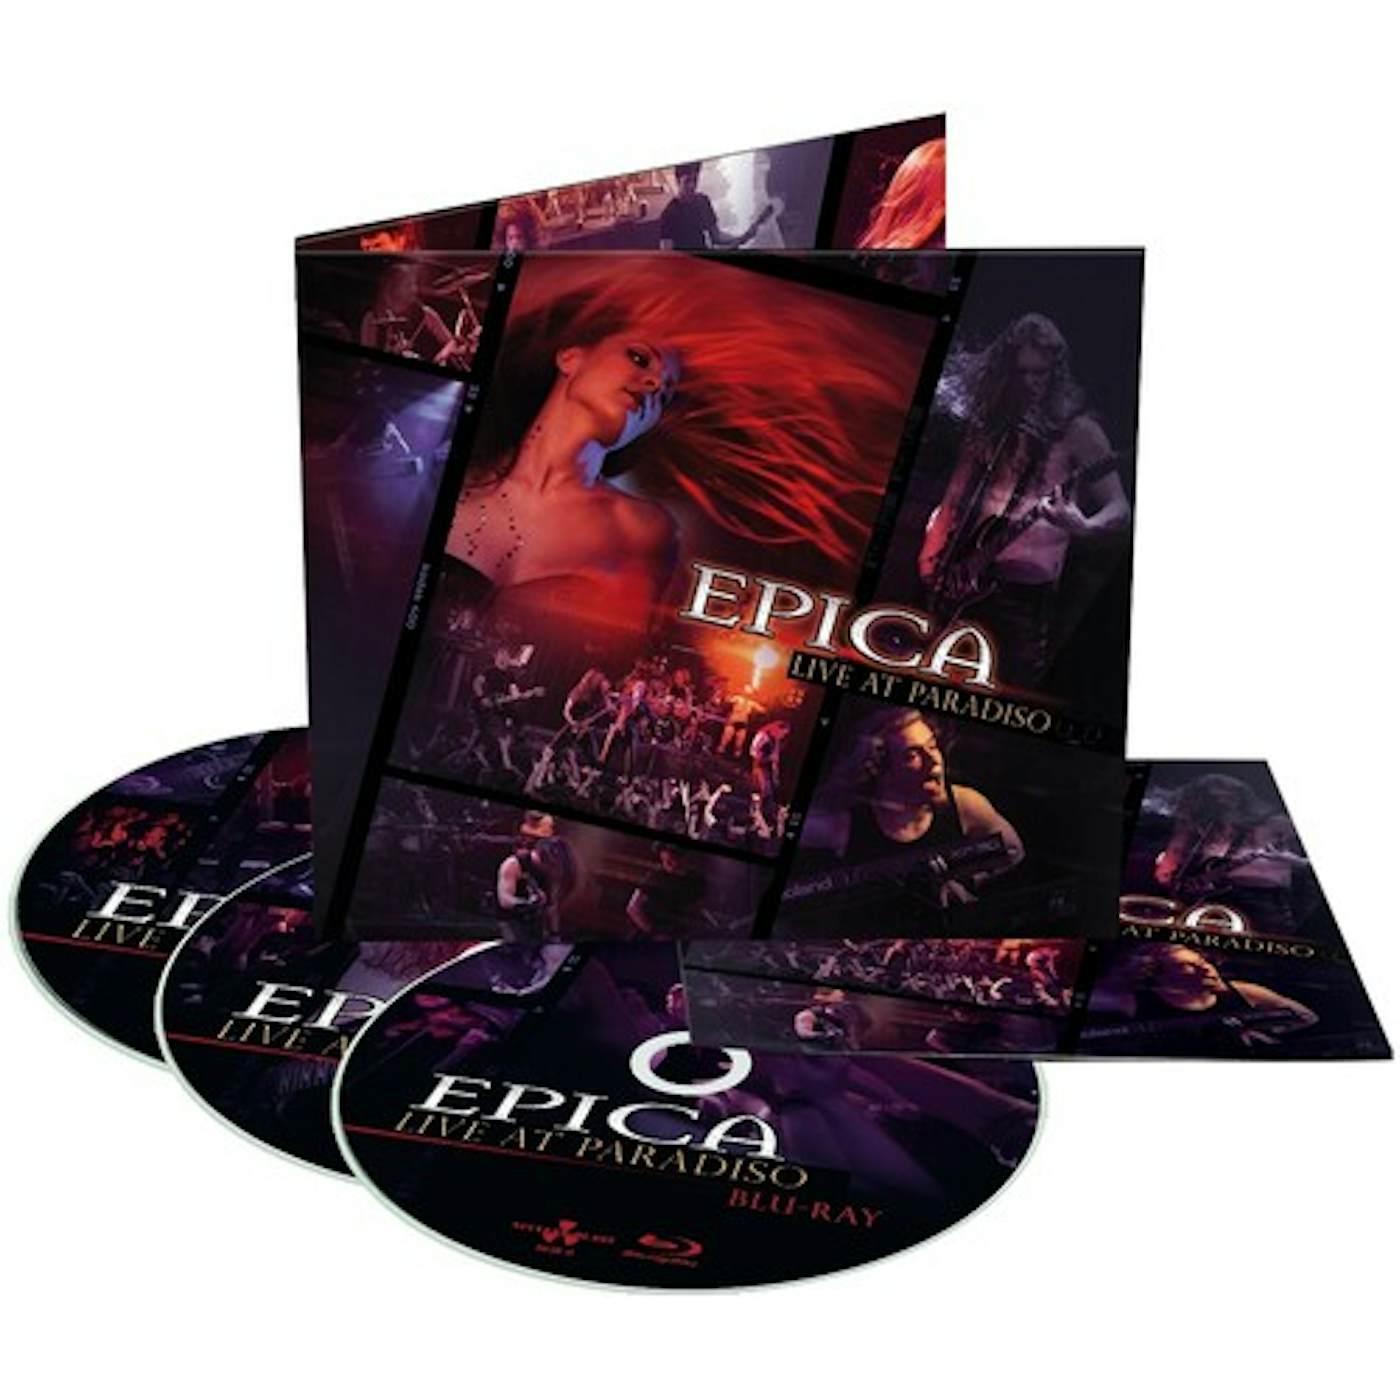 Epica LIVE IN PARADISO 3-DISC CD